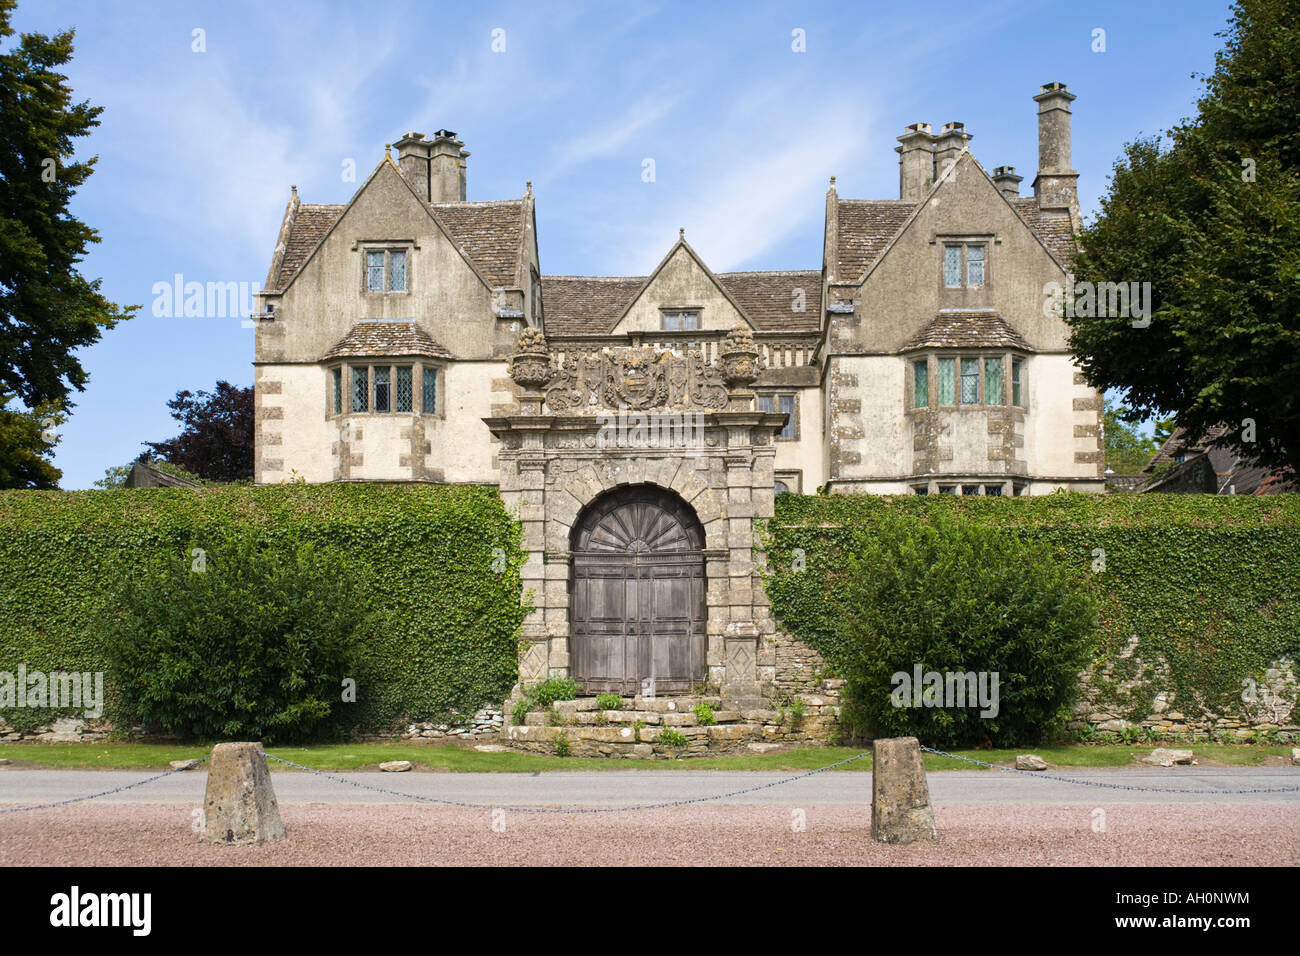 The manor house in the Cotswold village of Cold Ashton, South Gloucestershire UK Stock Photo